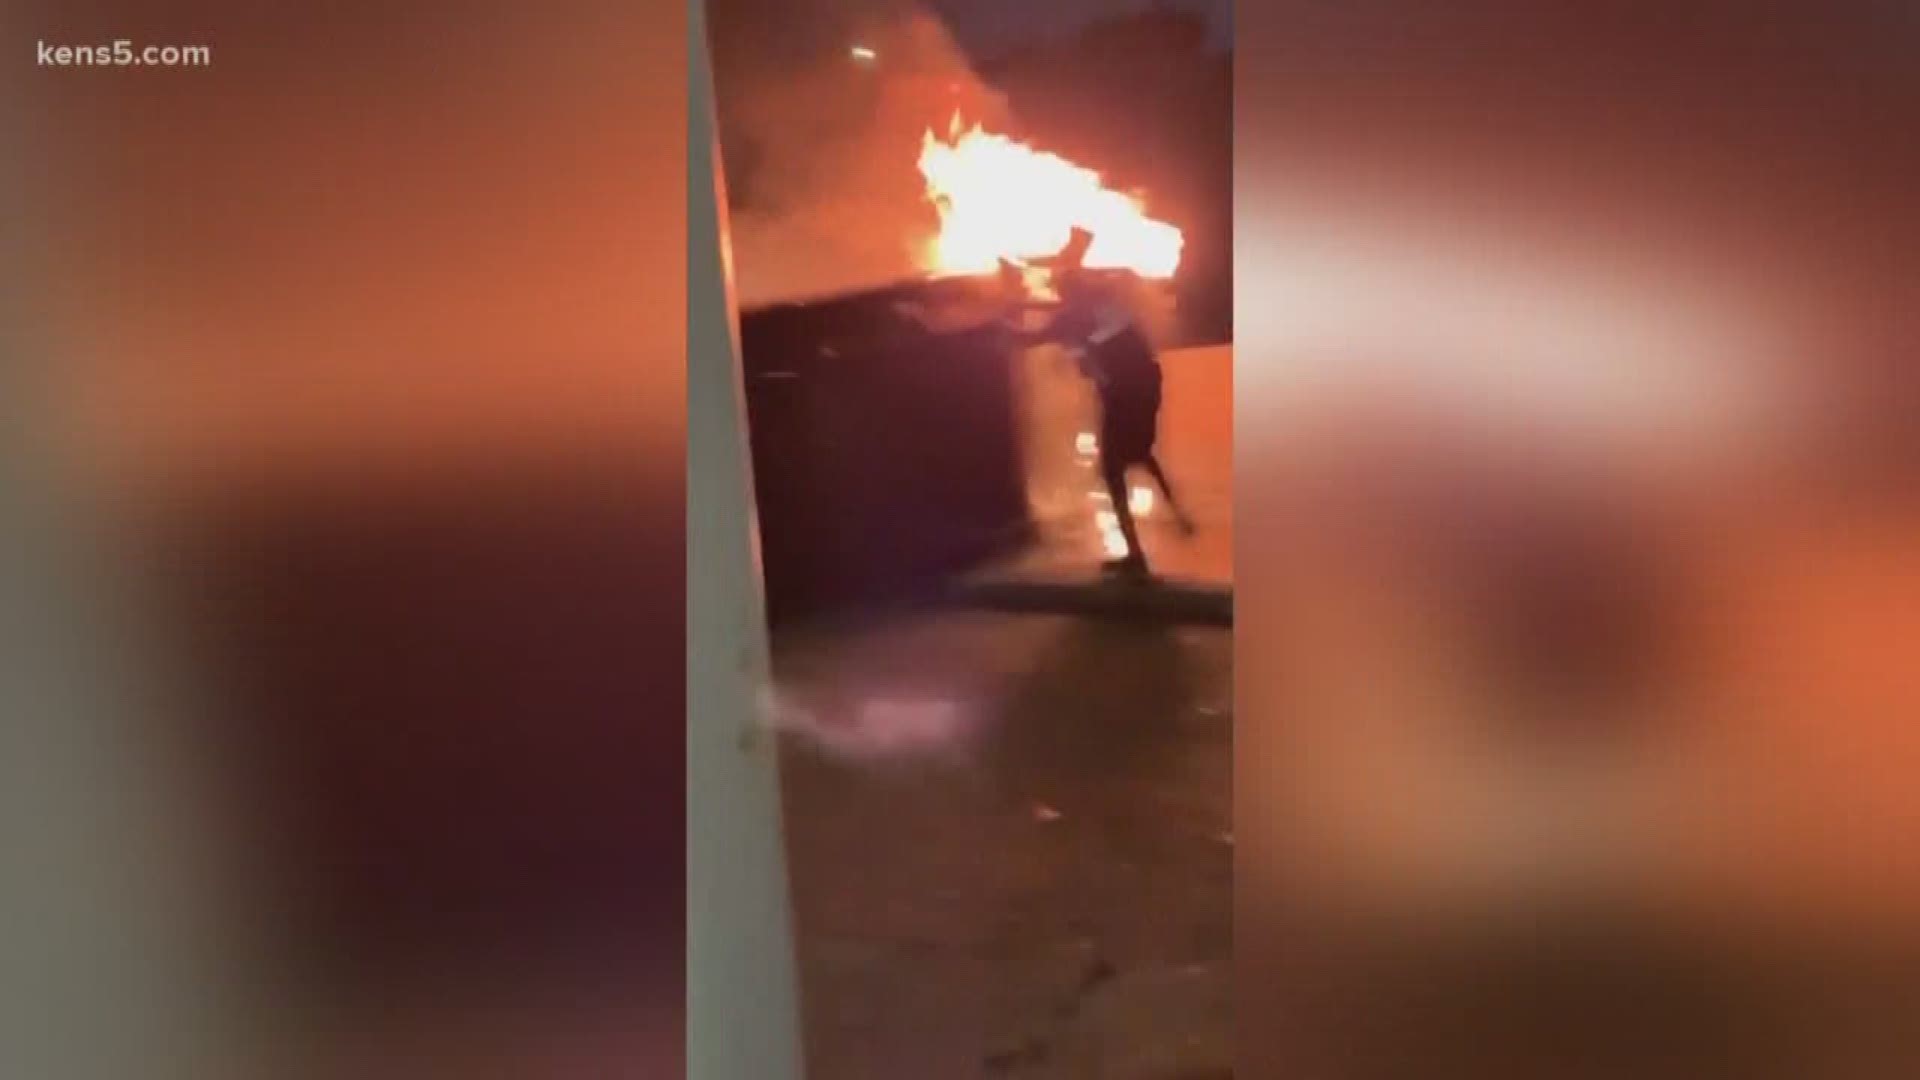 The life-saving actions of an off-duty police officer were caught on camera this morning after he rushed in to save a woman from a fiery crash on the northwest side. Tonight we're learning that two other men were also there to help. Eyewitness news reporter Vanessa Croix joins us live to tell us what happened when the camera wasn't rolling.